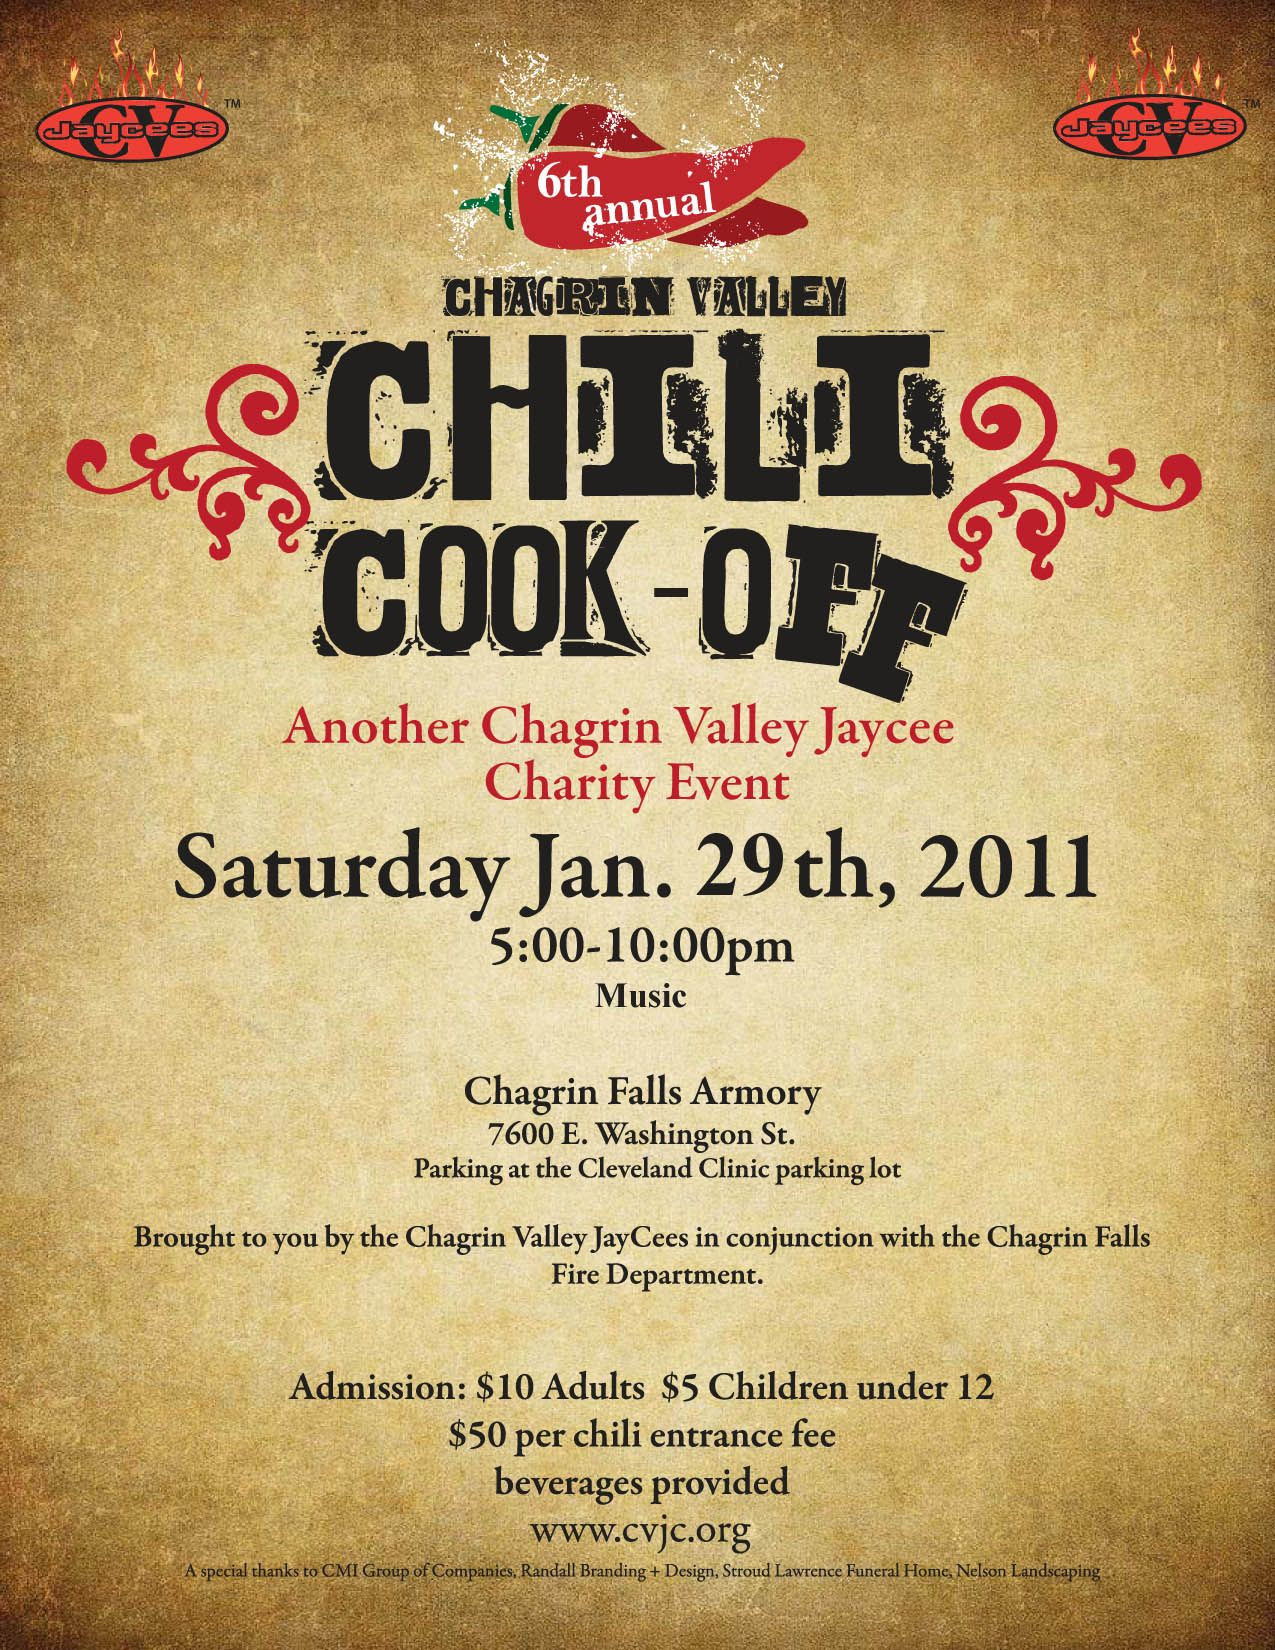 Chili Cook Off Flyer Template Free Printable - Wow - Image - Free Printable Flyers For Church